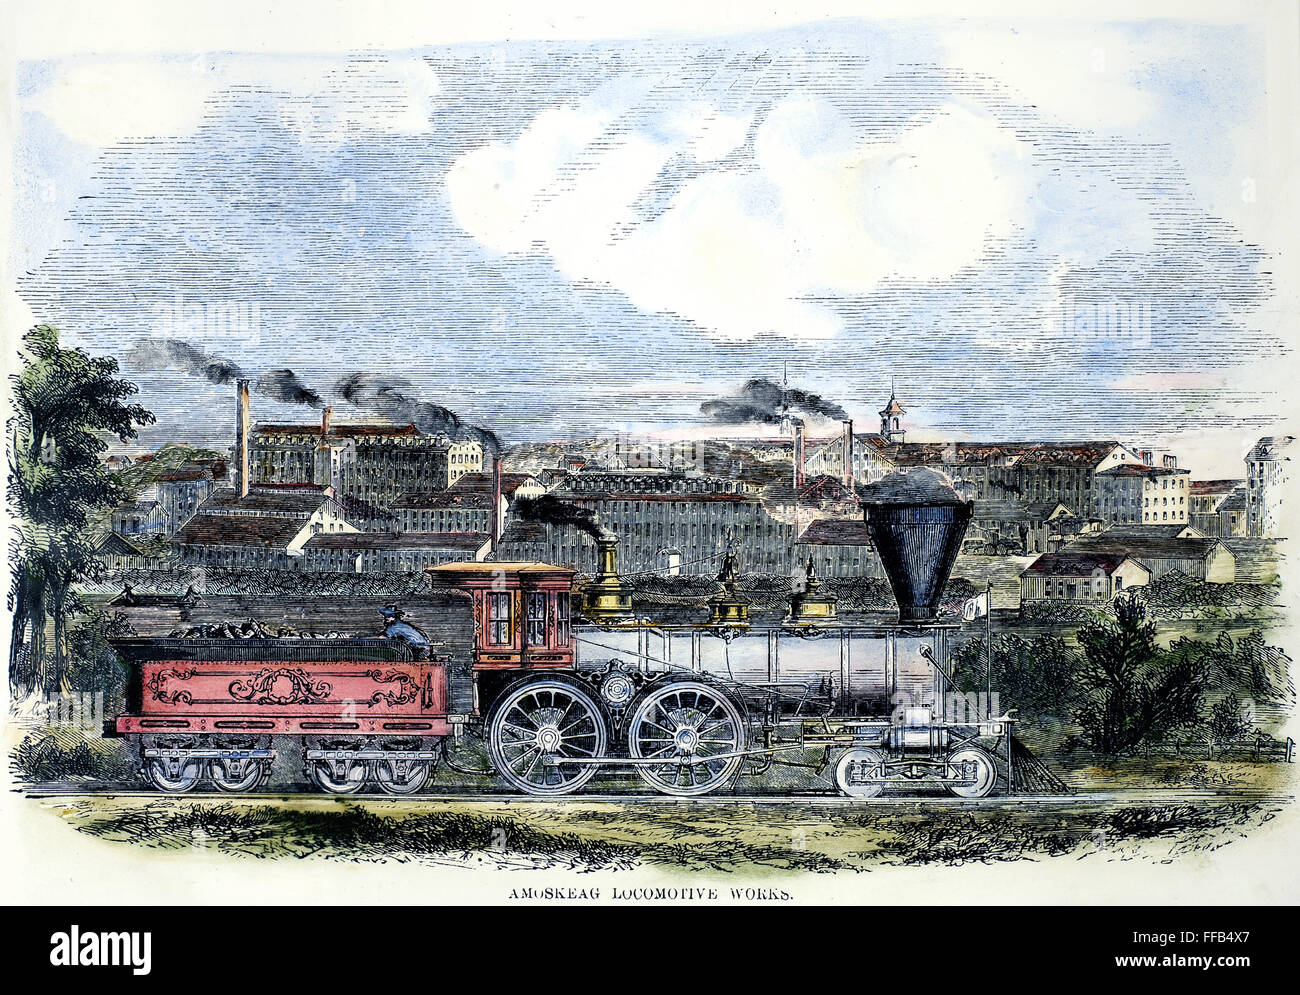 LOCOMOTIVE FACTORY, c1855. /nThe Amoskeag Locomotive Works in New Hampshire. Color engraving, American, c1855. Stock Photo